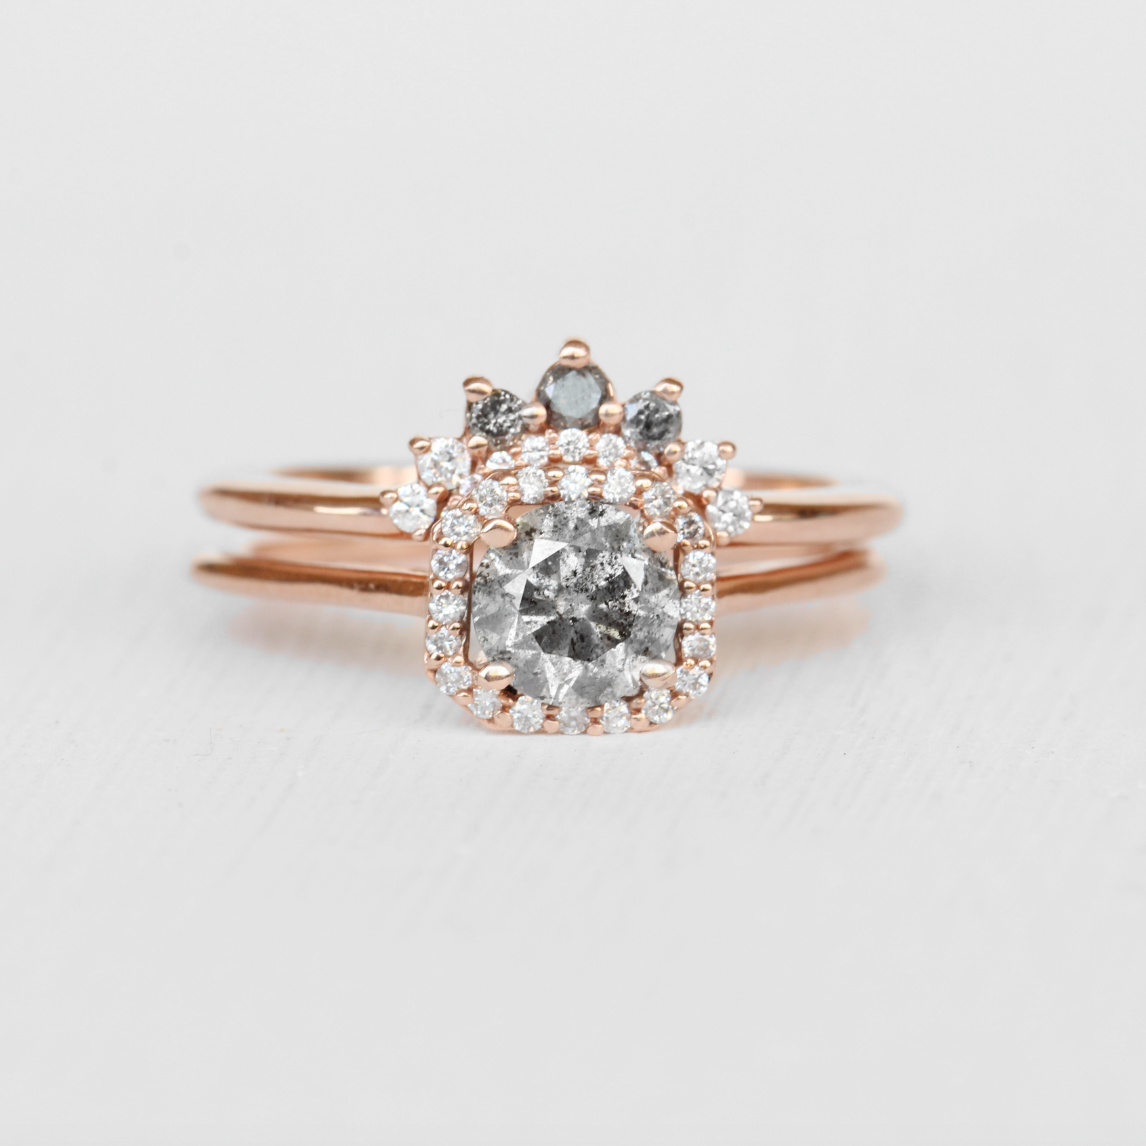 Ilsa - Contoured Celestial + White Diamond Wedding Stacking Band - made to order - Midwinter Co. Alternative Bridal Rings and Modern Fine Jewelry